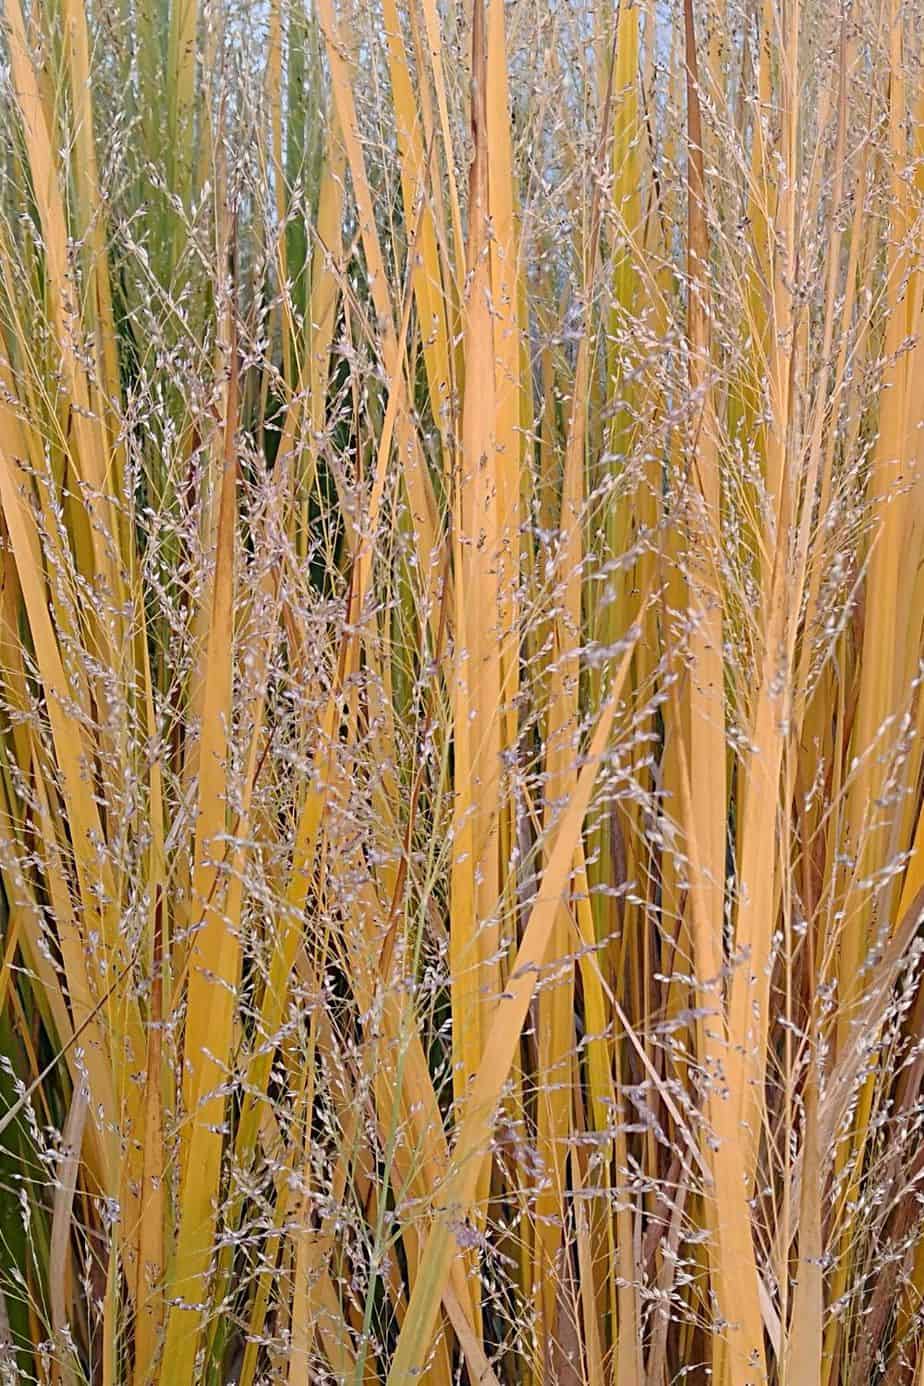 Switchgrass, though being a grass, is another plant you can grow for privacy